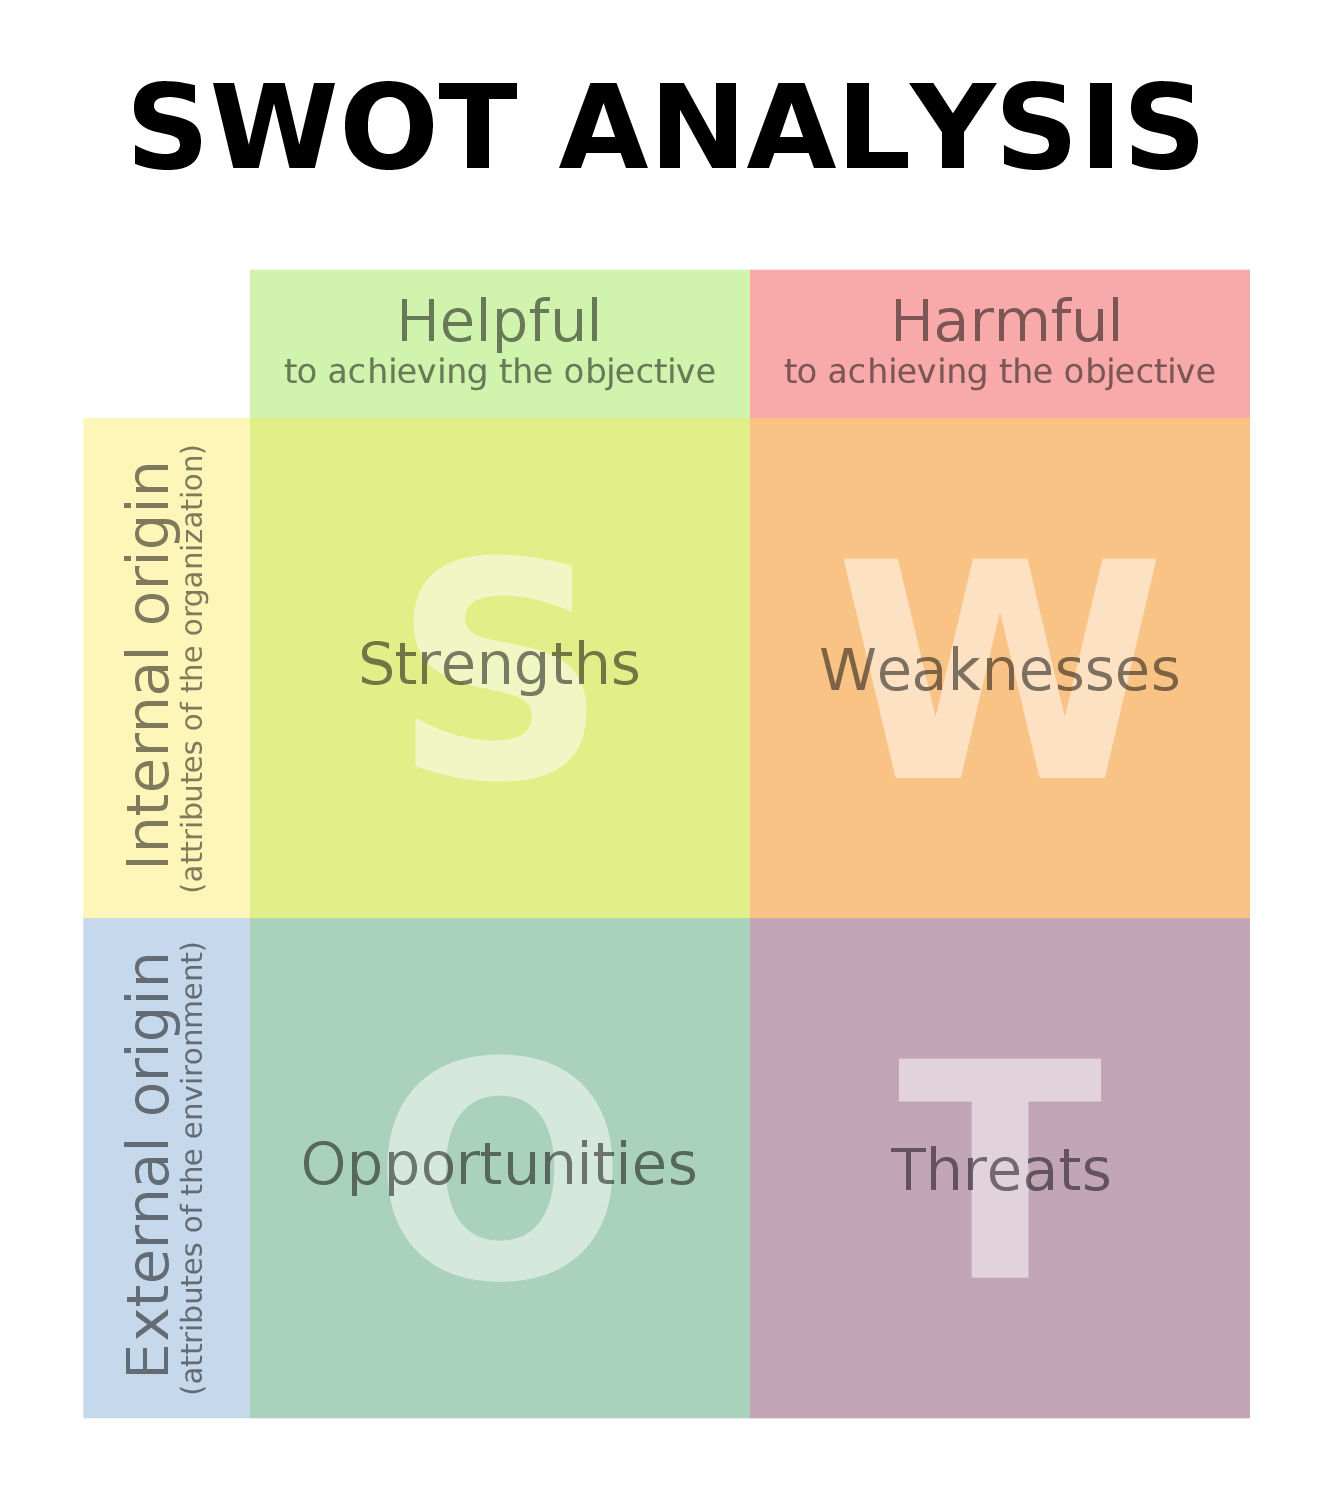 Swot Analysis How To Conduct A Proper One